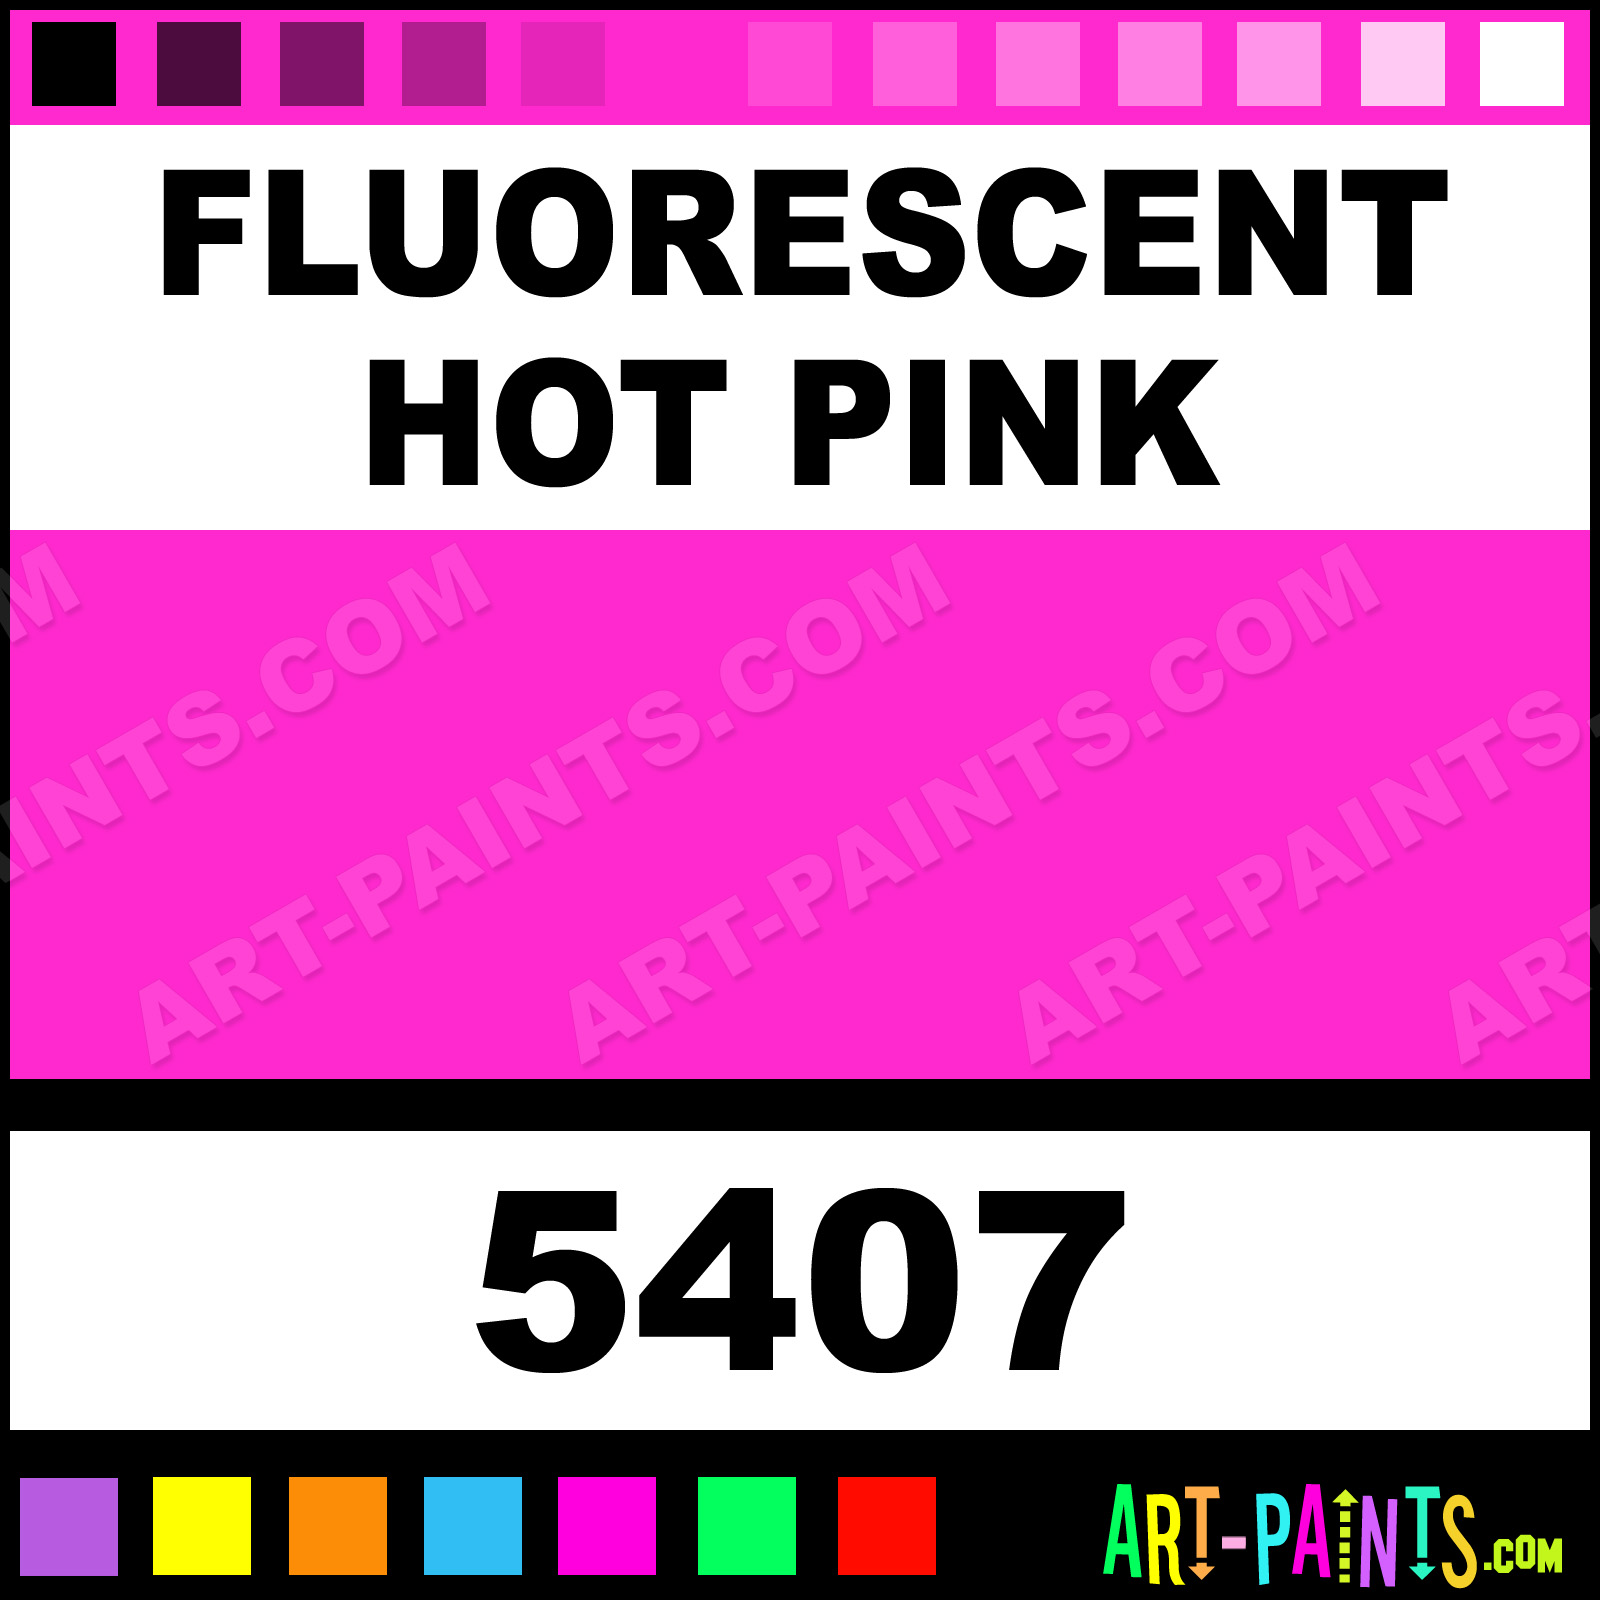 Fluorescent Hot Pink Professional Airbrush Spray Paints - 5407 -  Fluorescent Hot Pink Paint, Fluorescent Hot Pink Color, Createx  Professional Spray Paint, FF28CE 